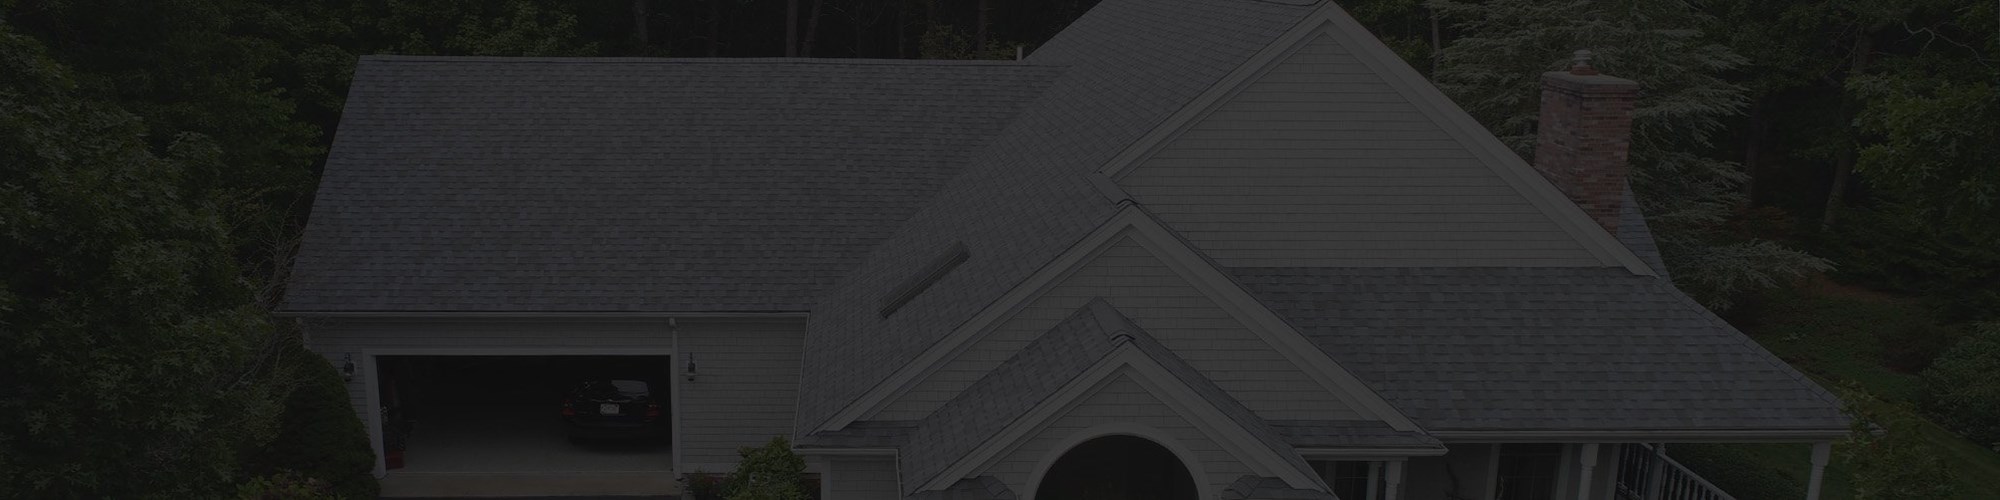 Fall River roofing contractors